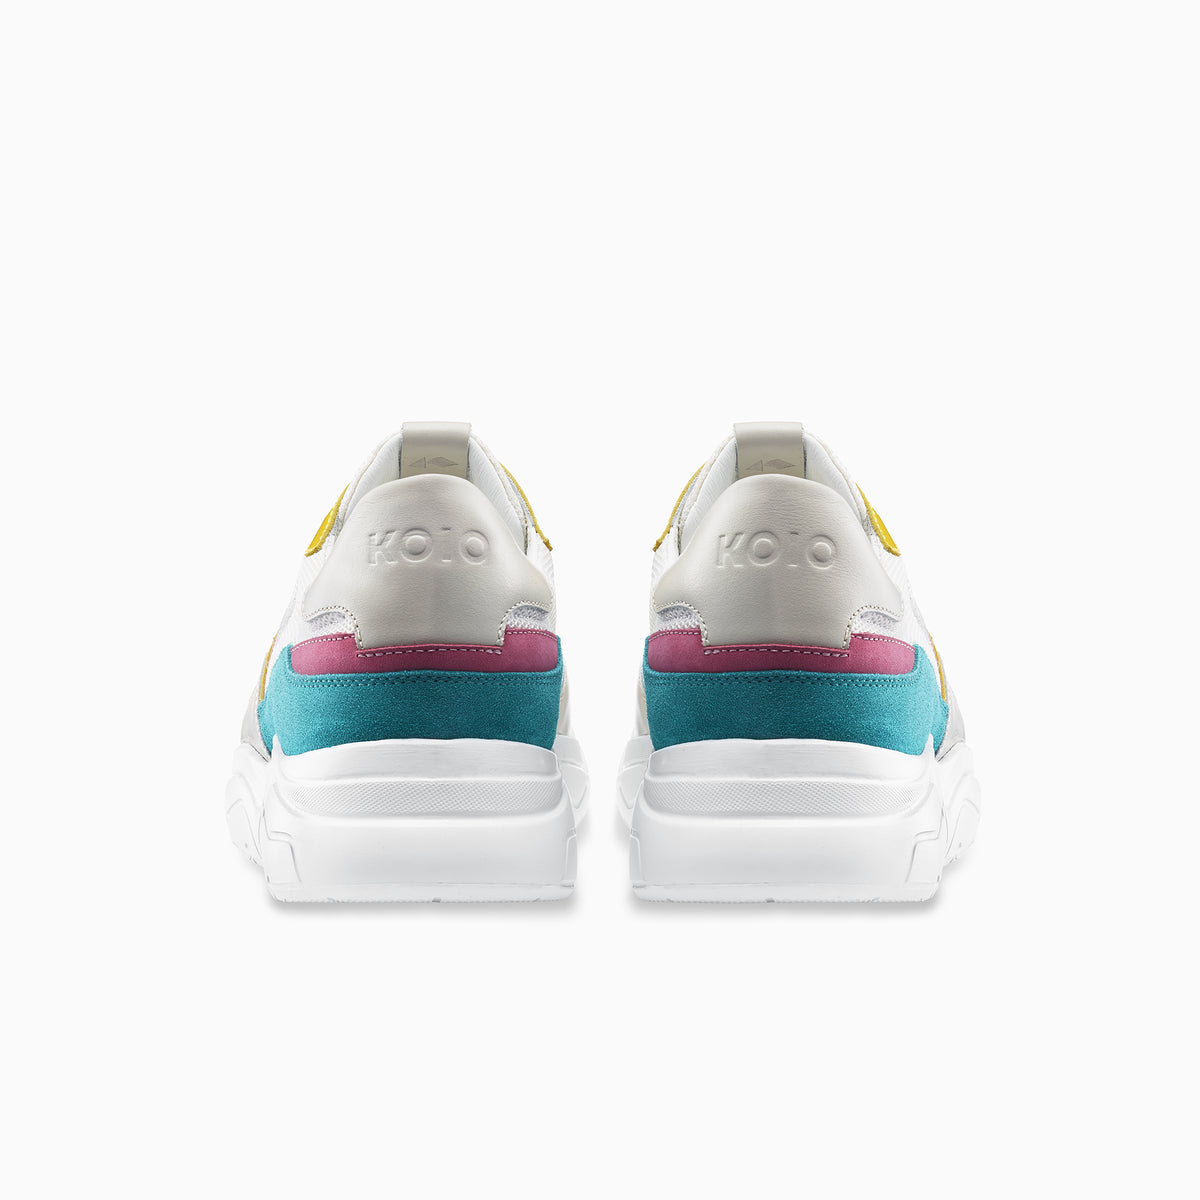 Download Women's Low Top Chunky Sneaker | Koio Avalanche Rad - KOIO